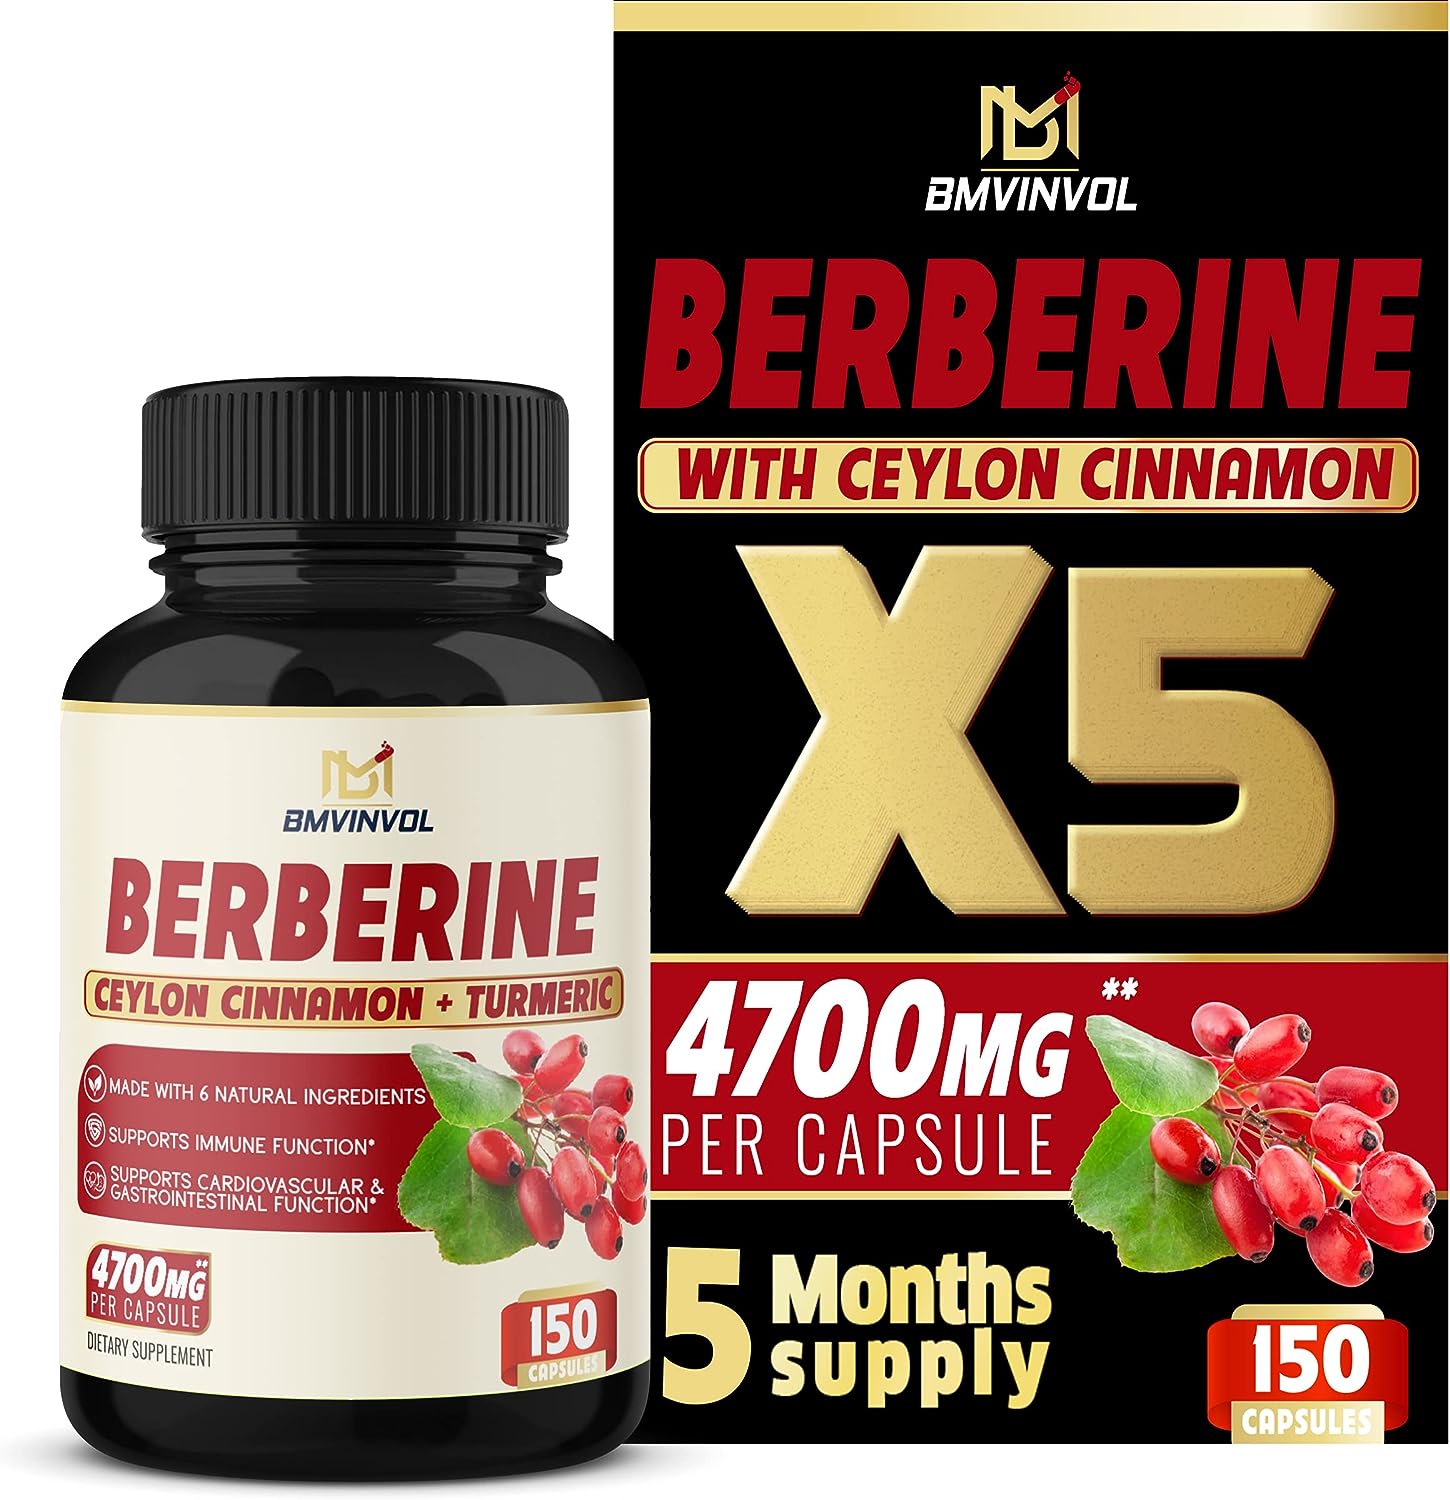 Berberine Supplement 4700mg - 5 Months Supply - High Potency with Ceylon Cinnamon, Turmeric - Supports Immune System, Cardiovascular  Gastrointestinal Function - Berberine HCl Supplement Pills